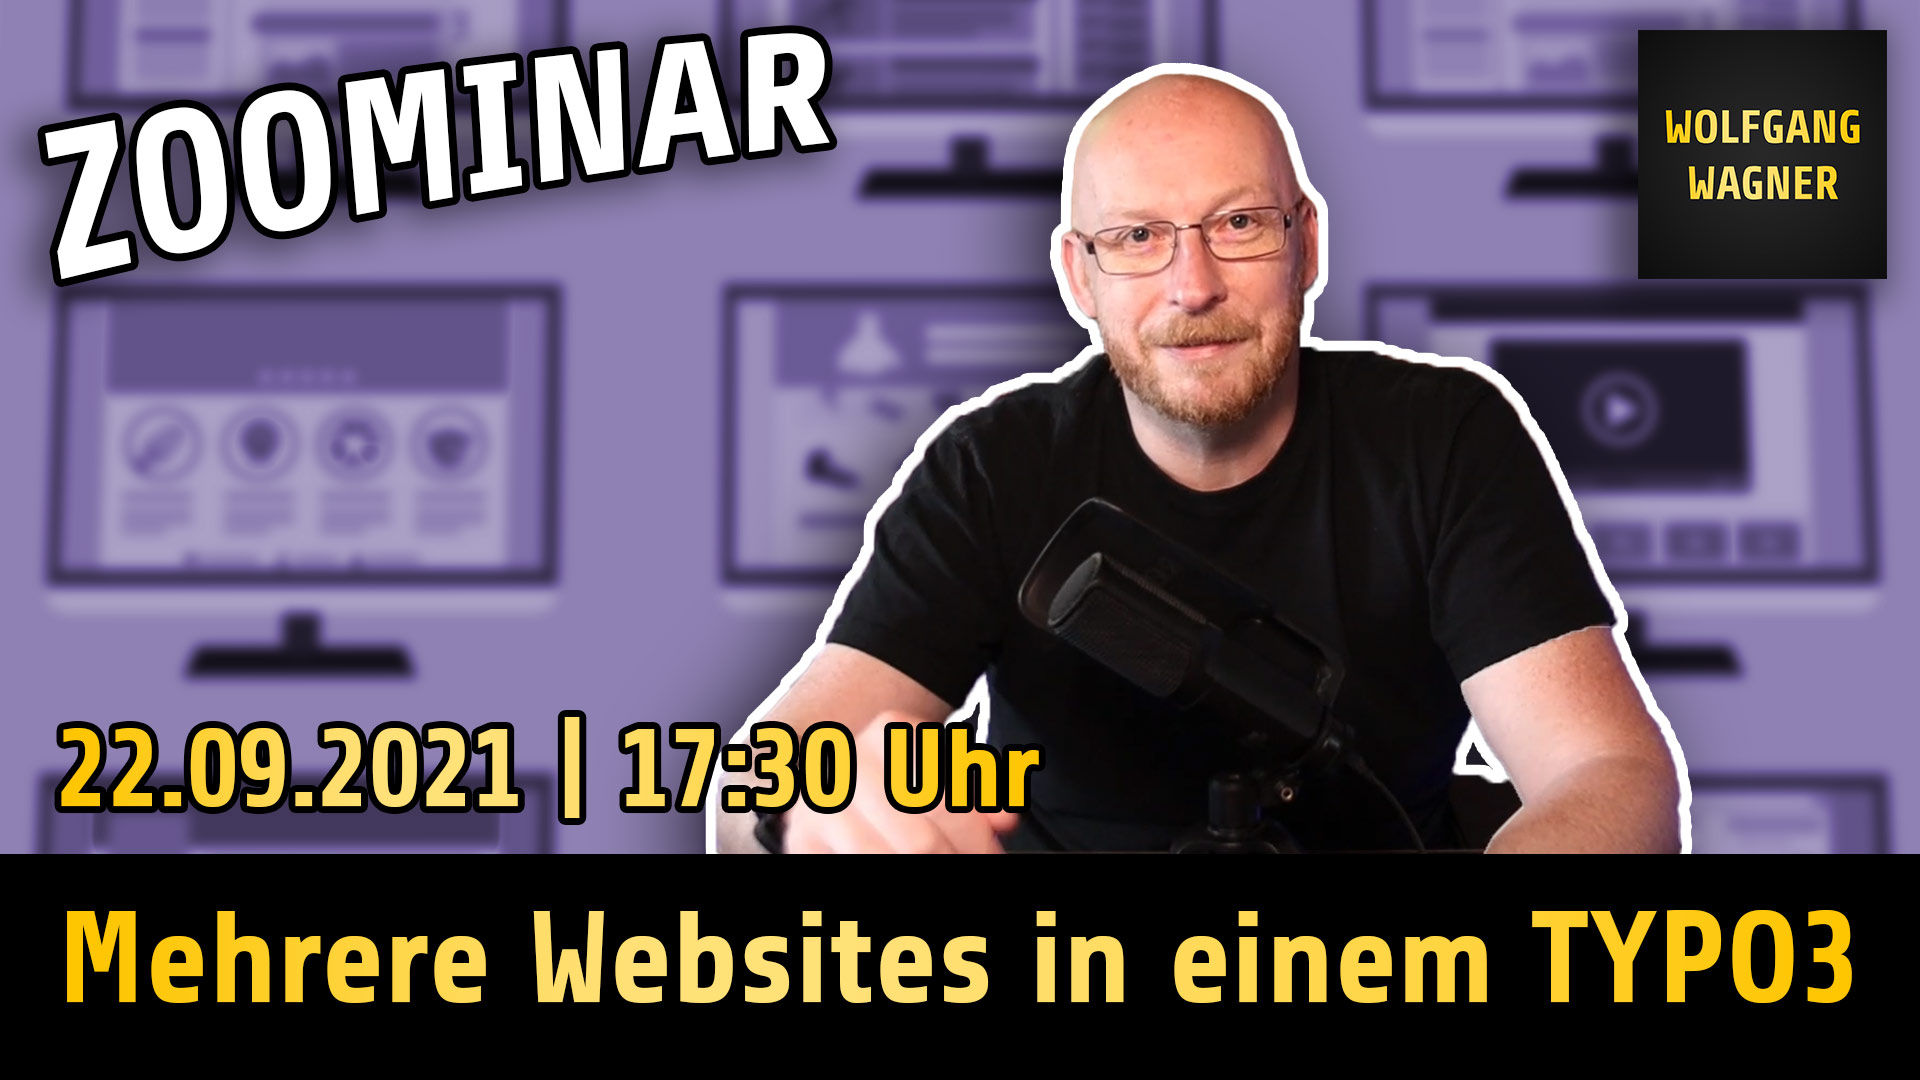 You are currently viewing Zoominar “Mehrere Websites in einem TYPO3” am 22.09.2021